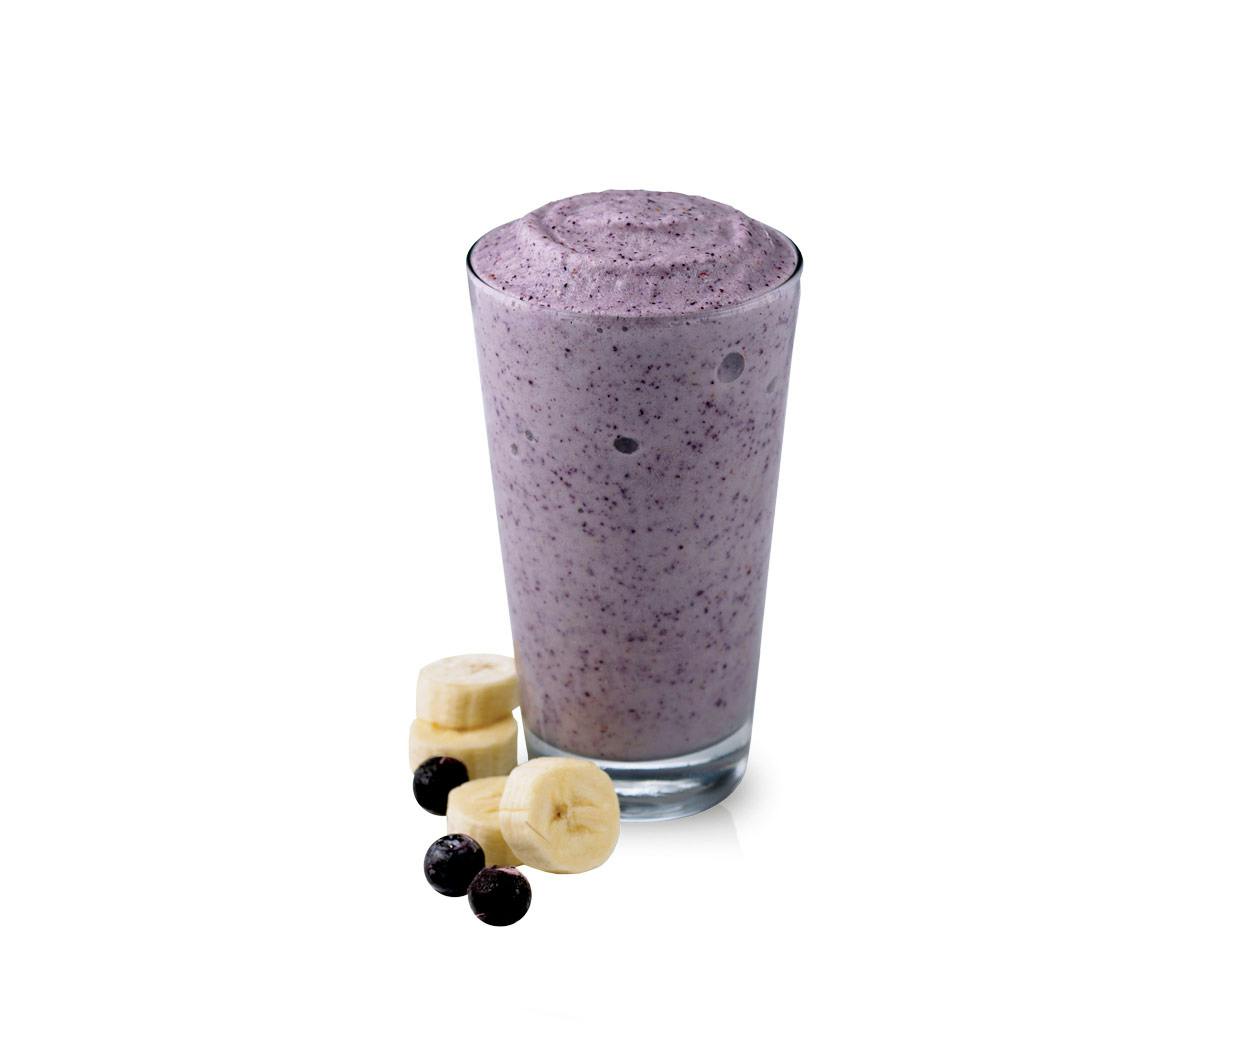 Blueberry Banana Smoothie from Cold Stone Creamery - Green Bay in Green Bay, WI